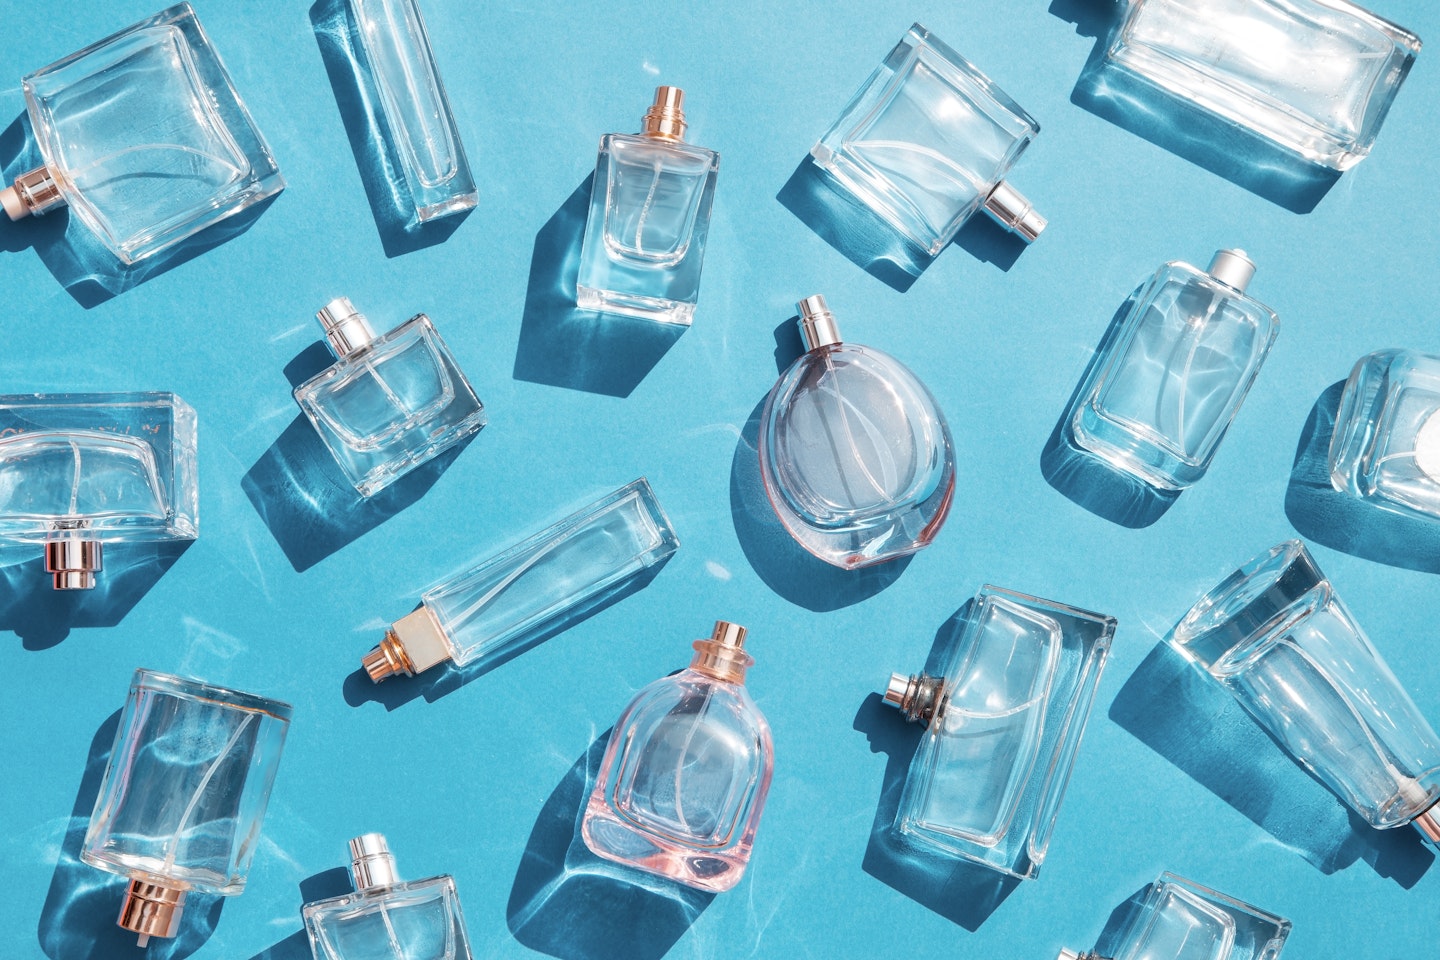 8 balmy perfumes to wear this summer